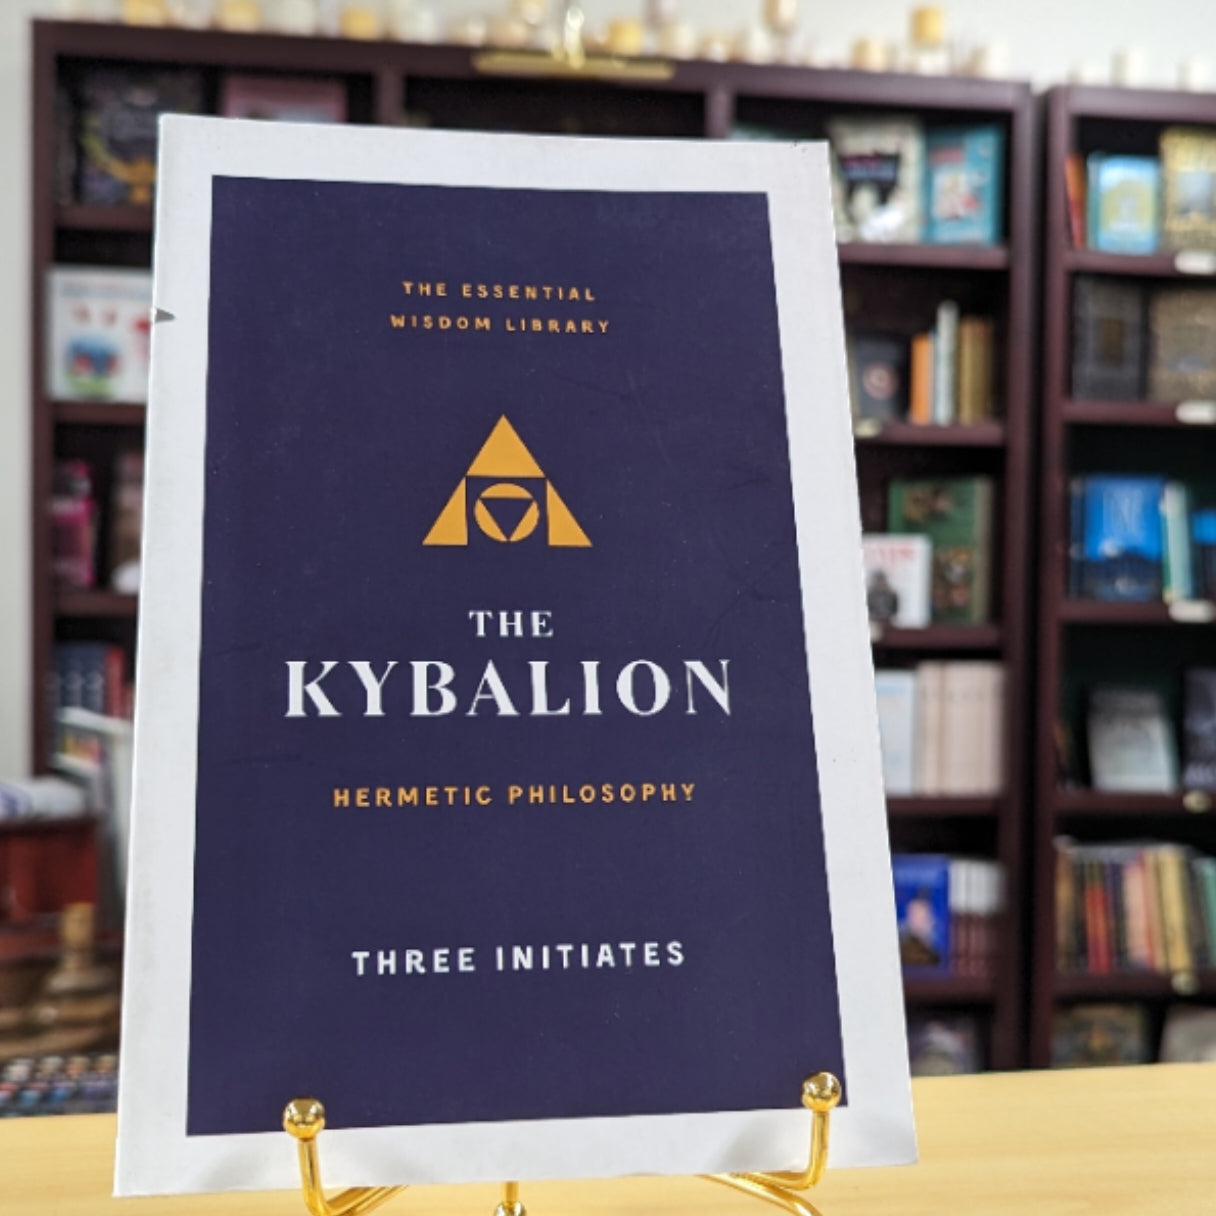 The Kybalion: Hermetic Philosophy (The Essential Wisdom Library)